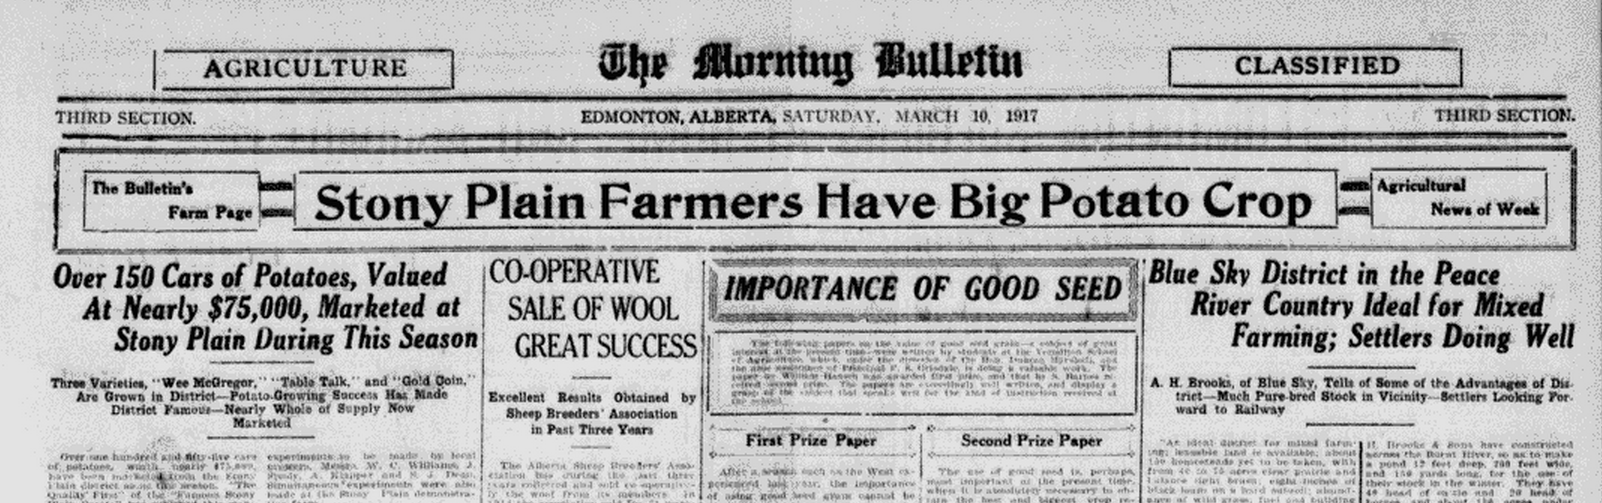 The Edmonton Bulletin on Saturday  March 10 1917 Blue Sky District in the Peace River Country Ideal for Mixed Farming per A H Brooks